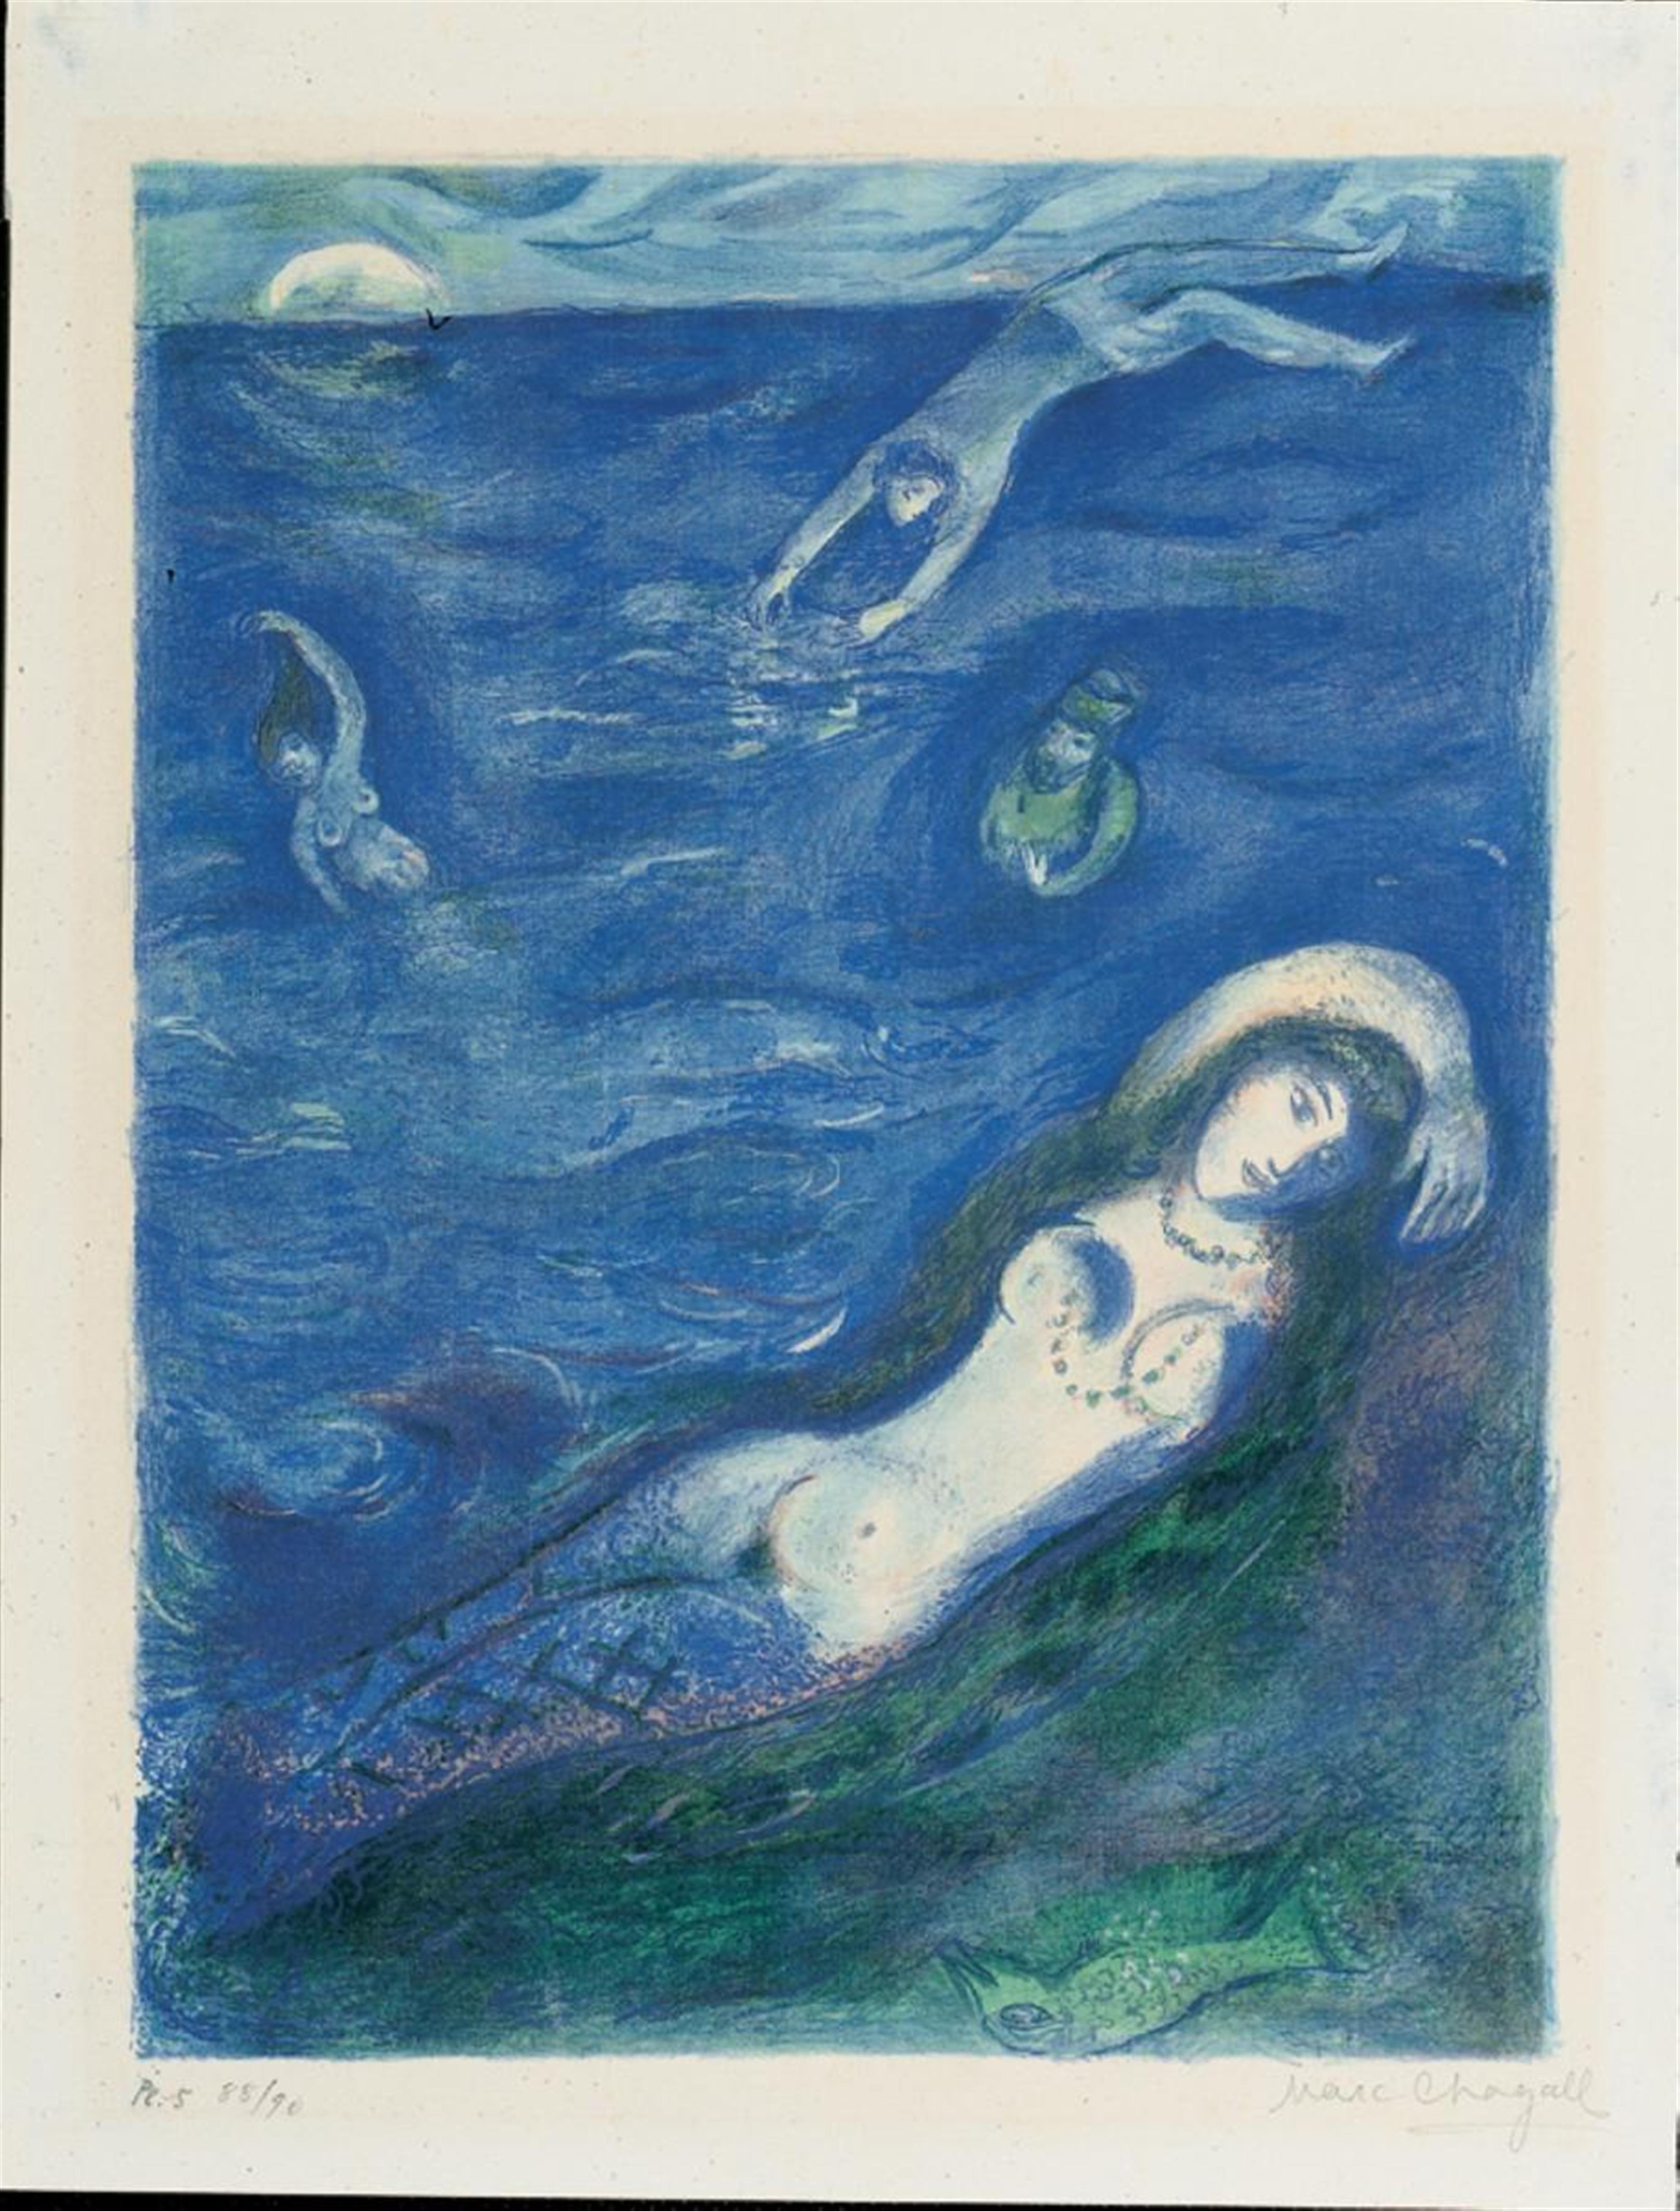 Marc Chagall - Four Tales from the Arabian Nights: Bildtafel 5 des Albums - image-1